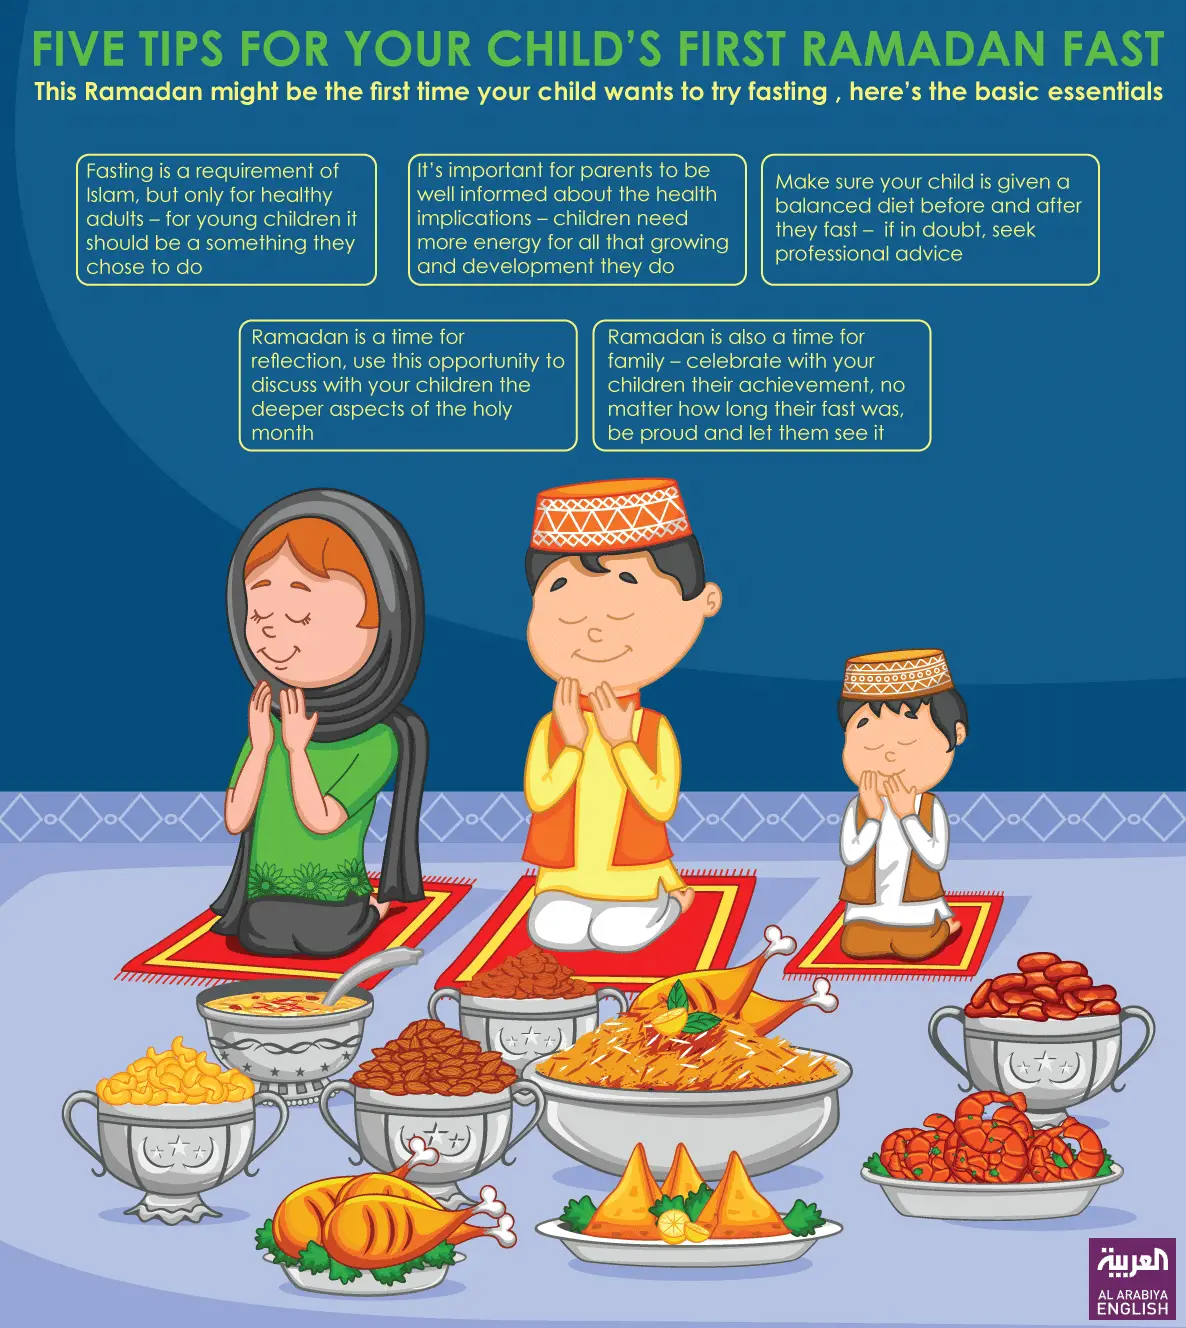 How to make your childs first Ramadan fast healthy and spiritual